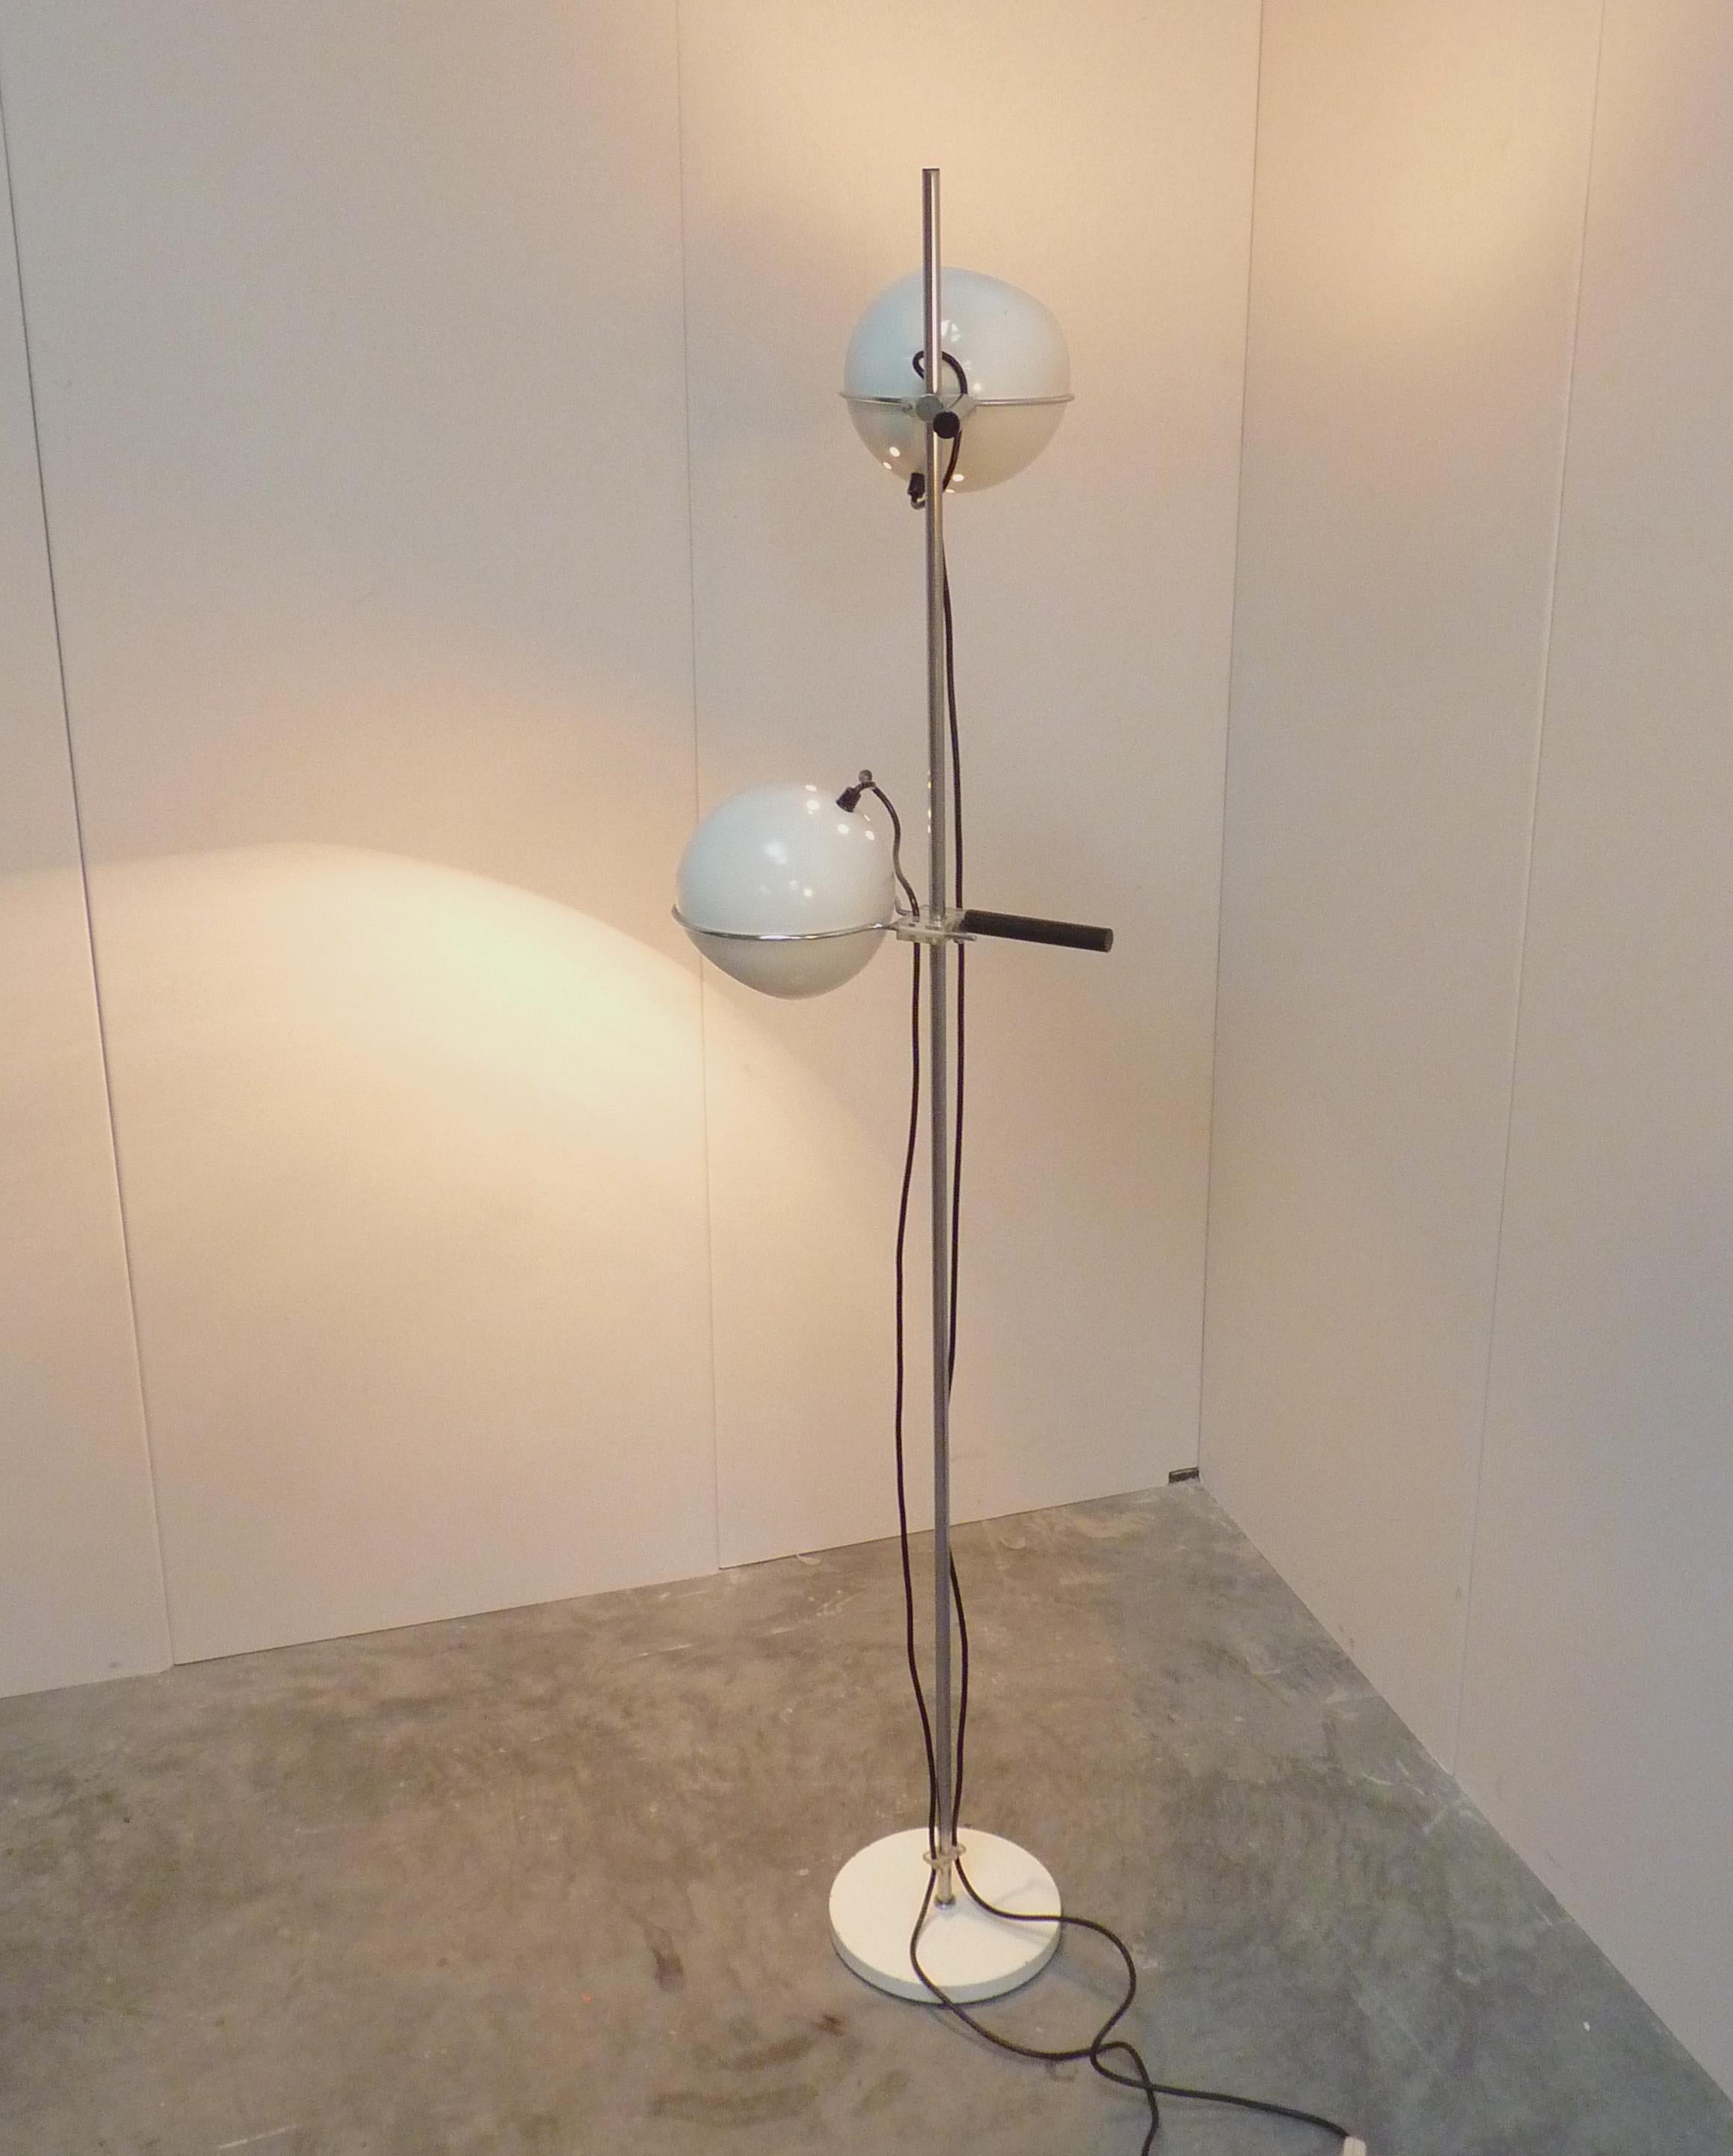 A well-known Gepo lamp is the Gepo 300 or the Gepo Napoli floor lamp, designed in the late 1960s and equipped with the special stylish handles at the light points. It is a beautiful vintage floor lamp with 2 light points. The white balls can be